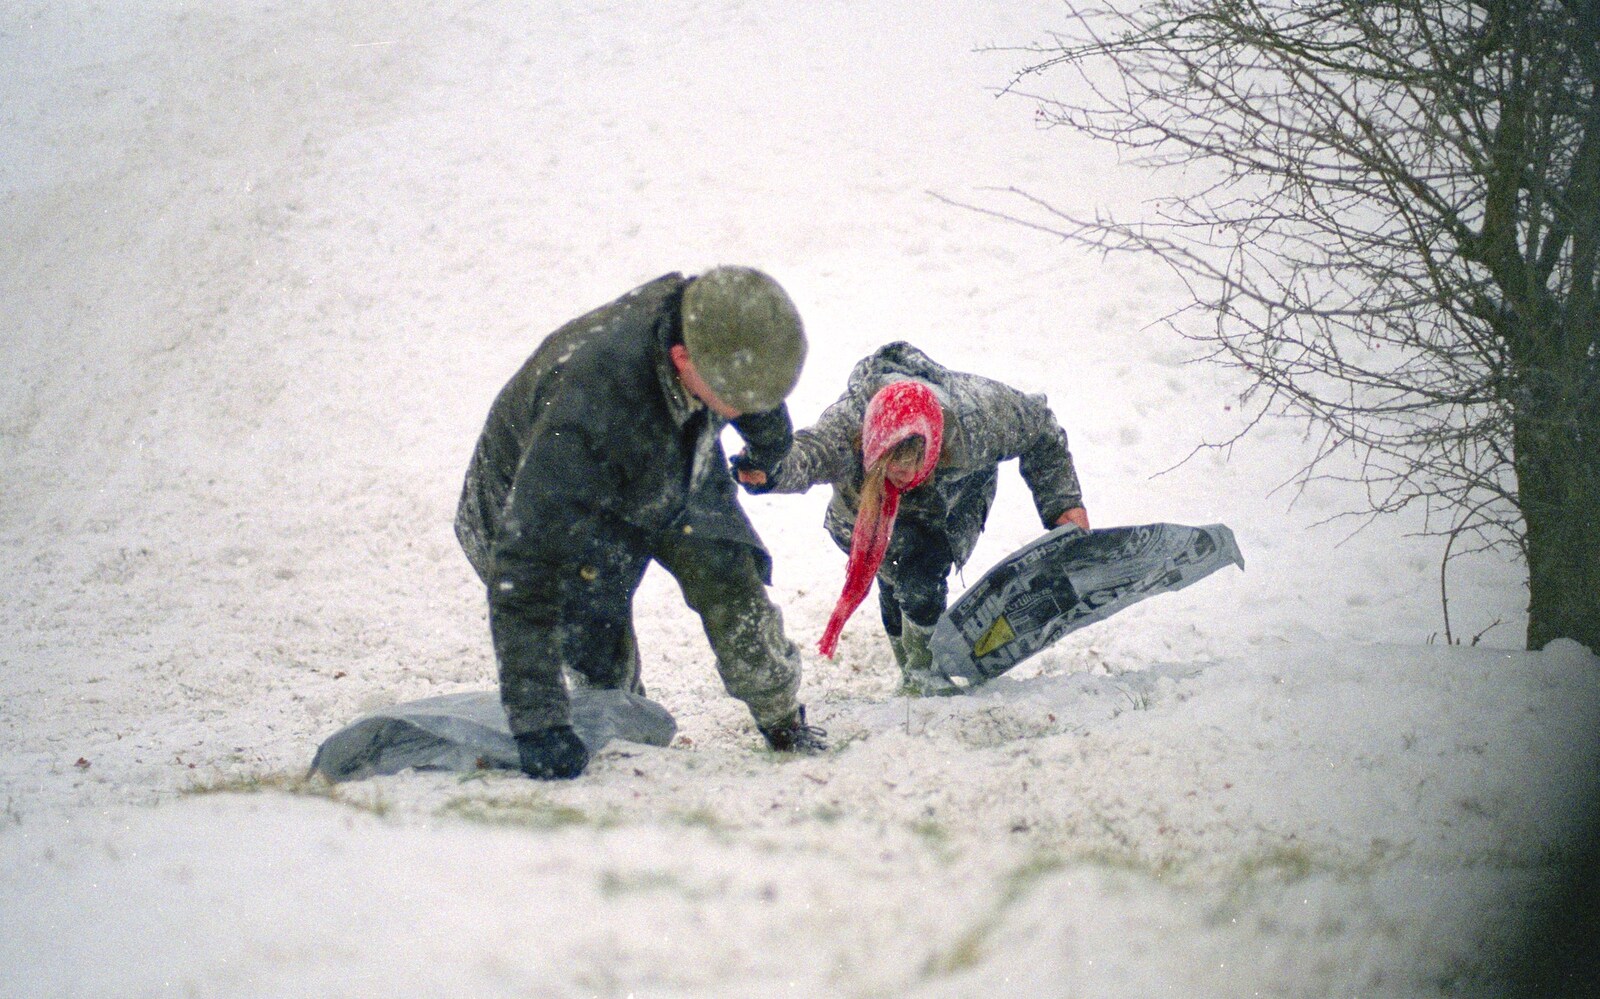 Geoff gives Janet a hand from Sledging on the Common and Some Music, Stuston, Suffolk - 5th February 1991